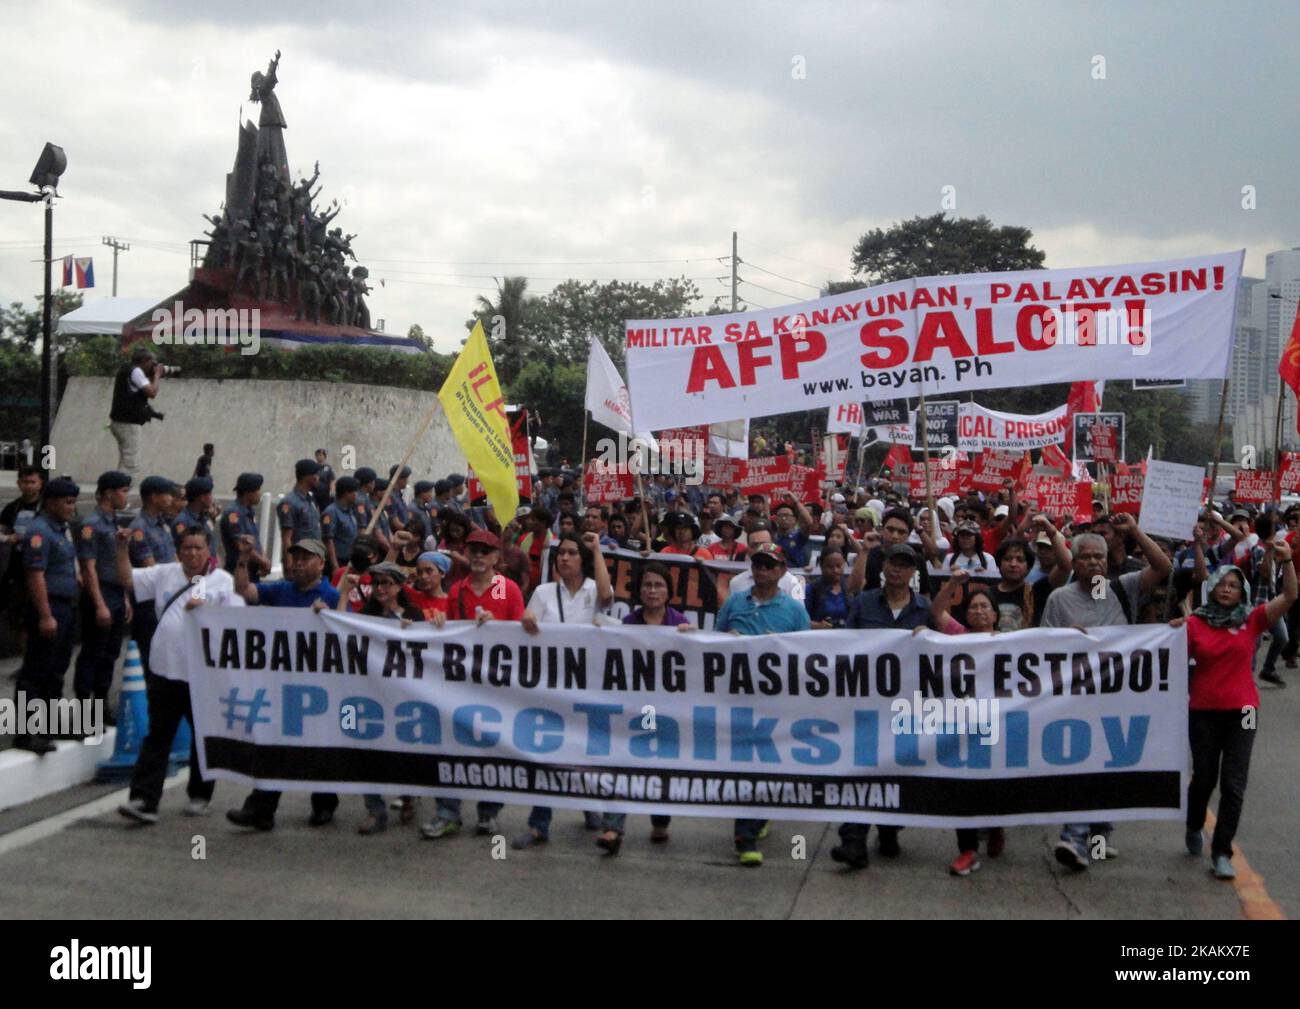 Protesters march towards Camp Aguinaldo during a protest on the 31st anniversary of the People Power Revolution on Saturday, February 25, 2017 in Quezon City, east of Manila, Philippines. The protesters called for the resumption of peace talks between the Philippine government and communist rebels. (Photo by Richard James Mendoza/NurPhoto) *** Please Use Credit from Credit Field *** Stock Photo